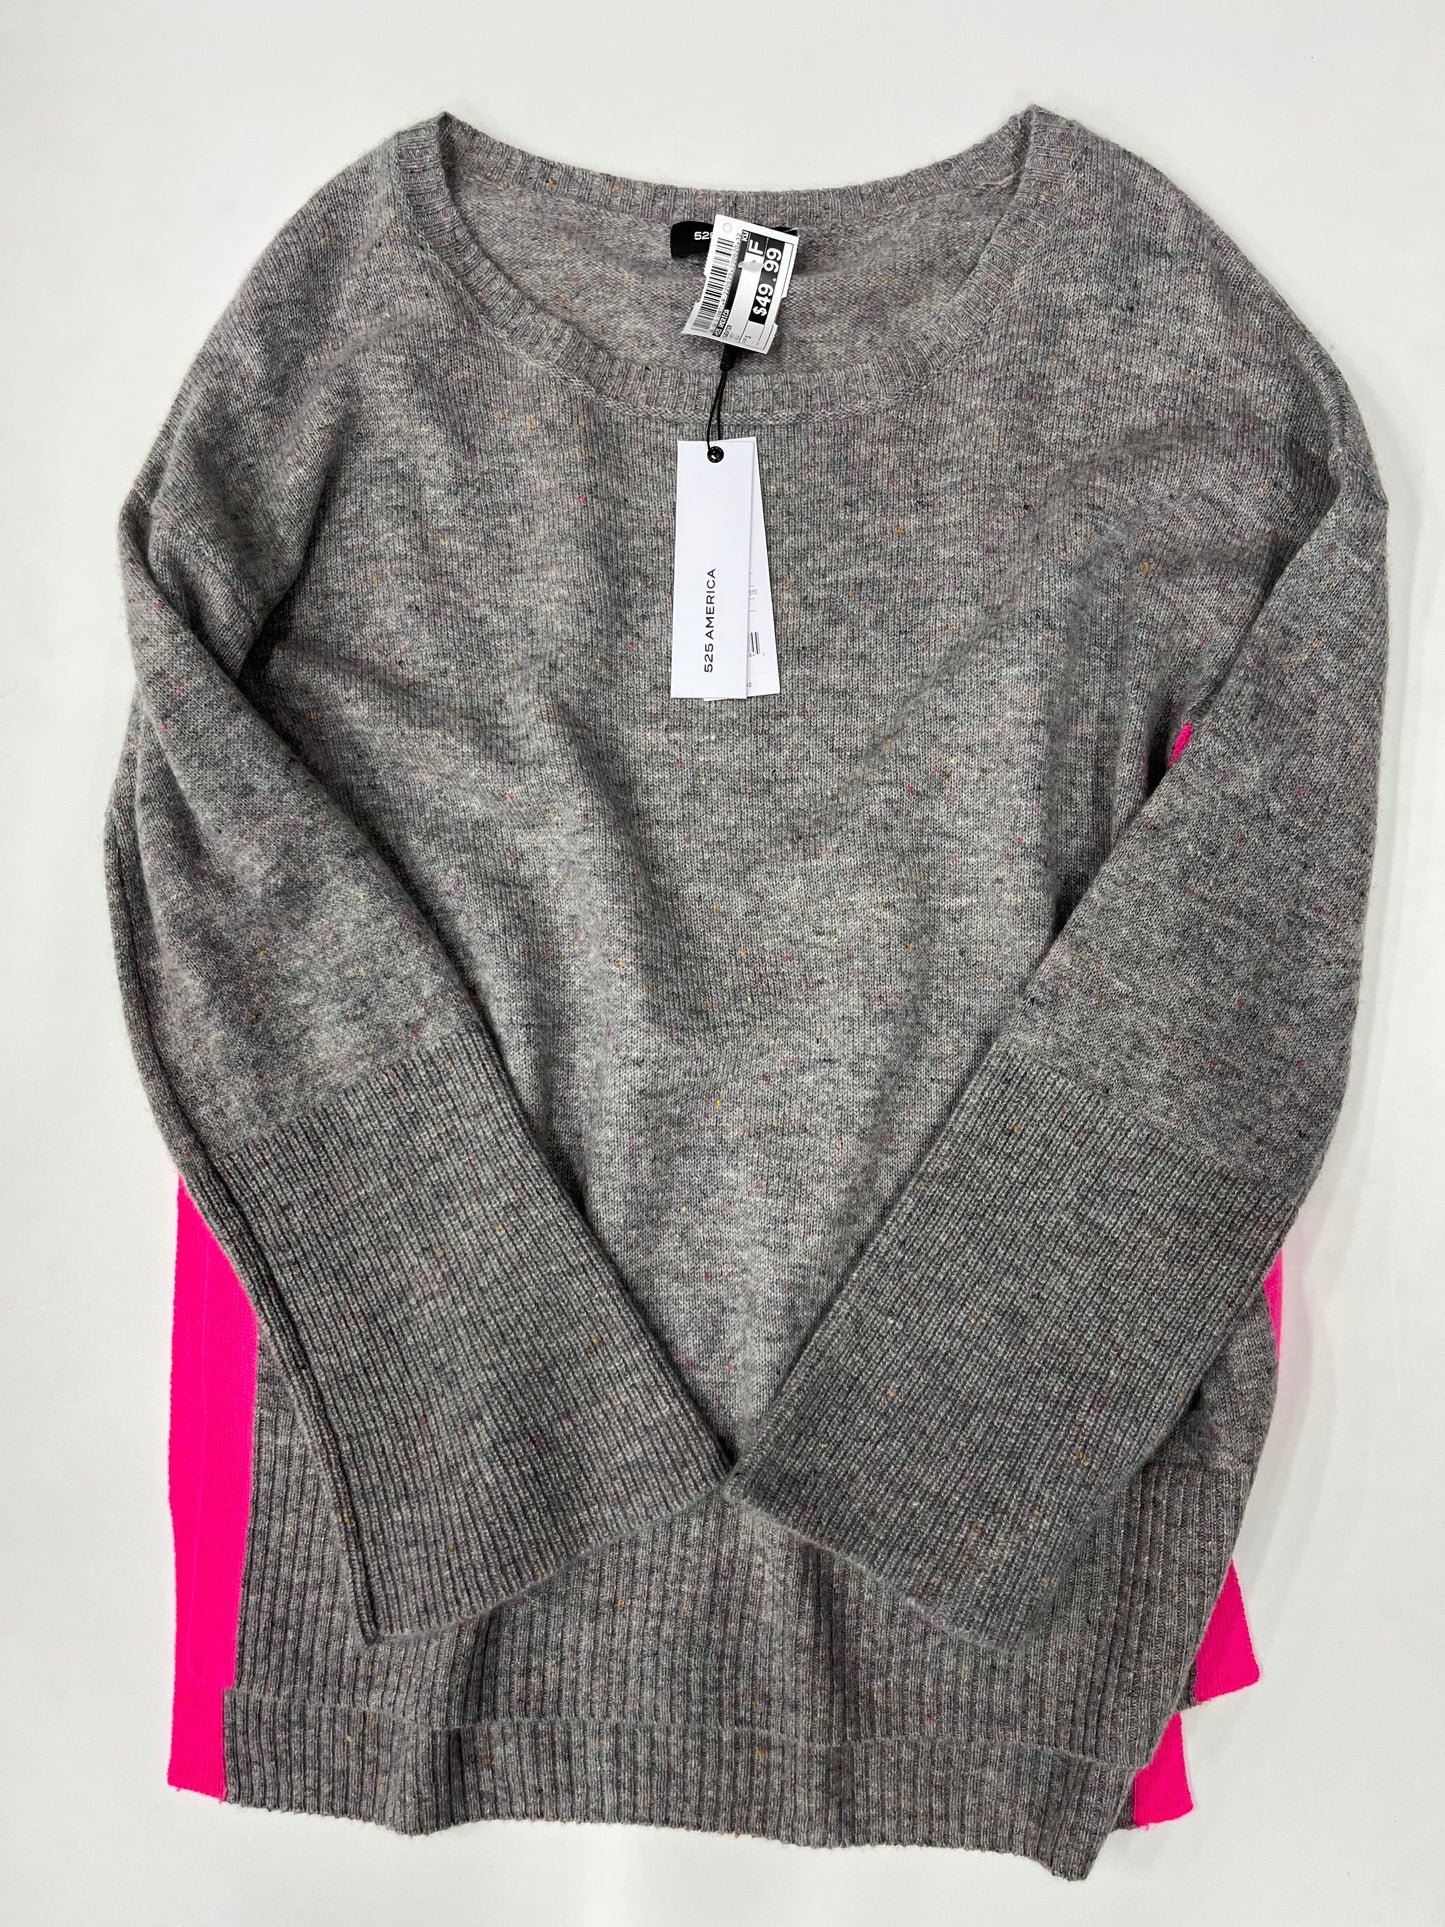 525 America Scoop Neck Knit Sweater Grey NWT Size S